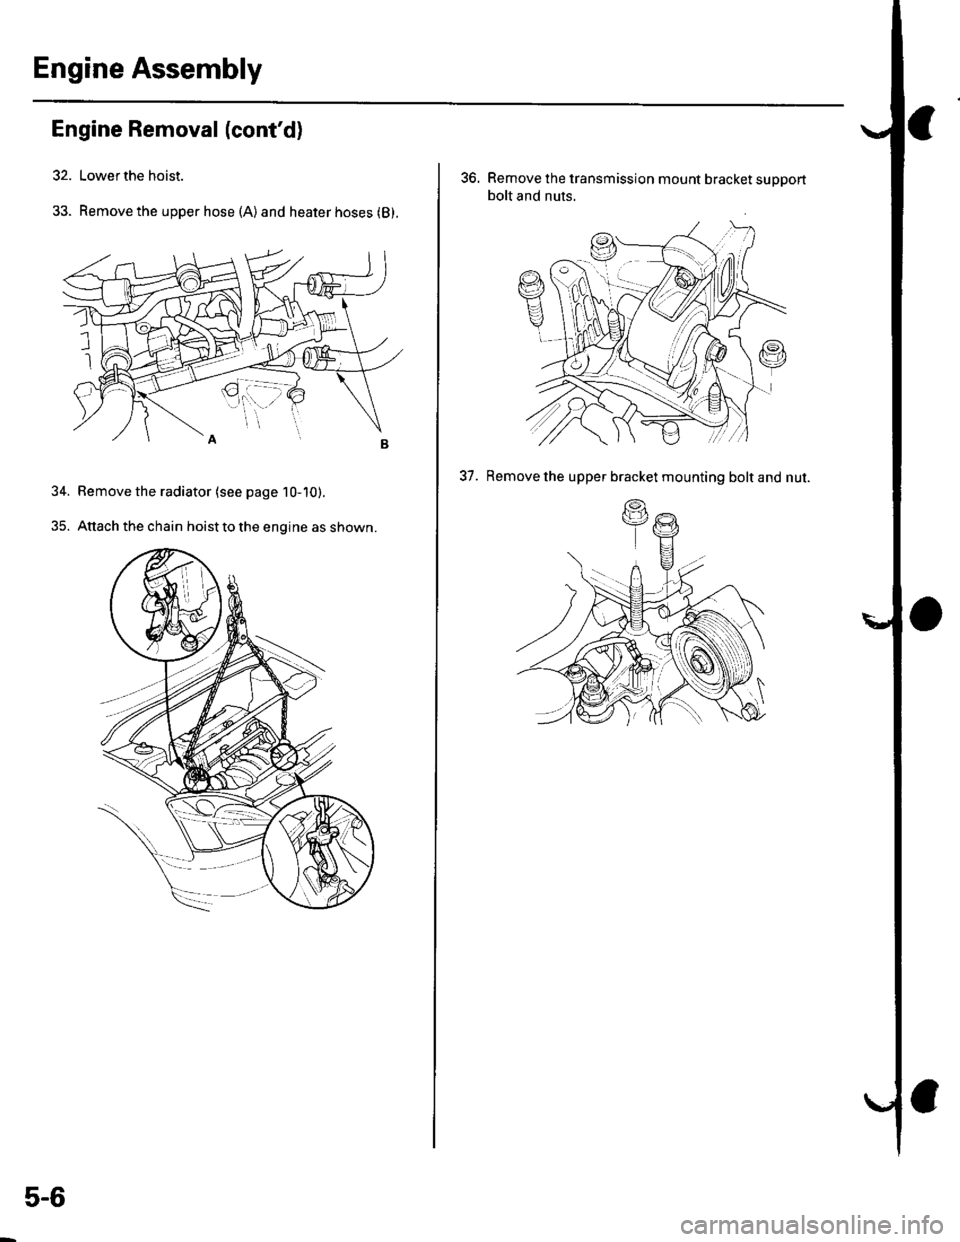 HONDA CIVIC 2003 7.G Workshop Manual Engine Assembly
Engine Removal (contd)
32. Lower the hoist.
33. Remove the upper hose (A)and heater hoses (B).
34. Bemove the radiator (see page 10-10).
35. Attach the chain hoist to the engine as sh